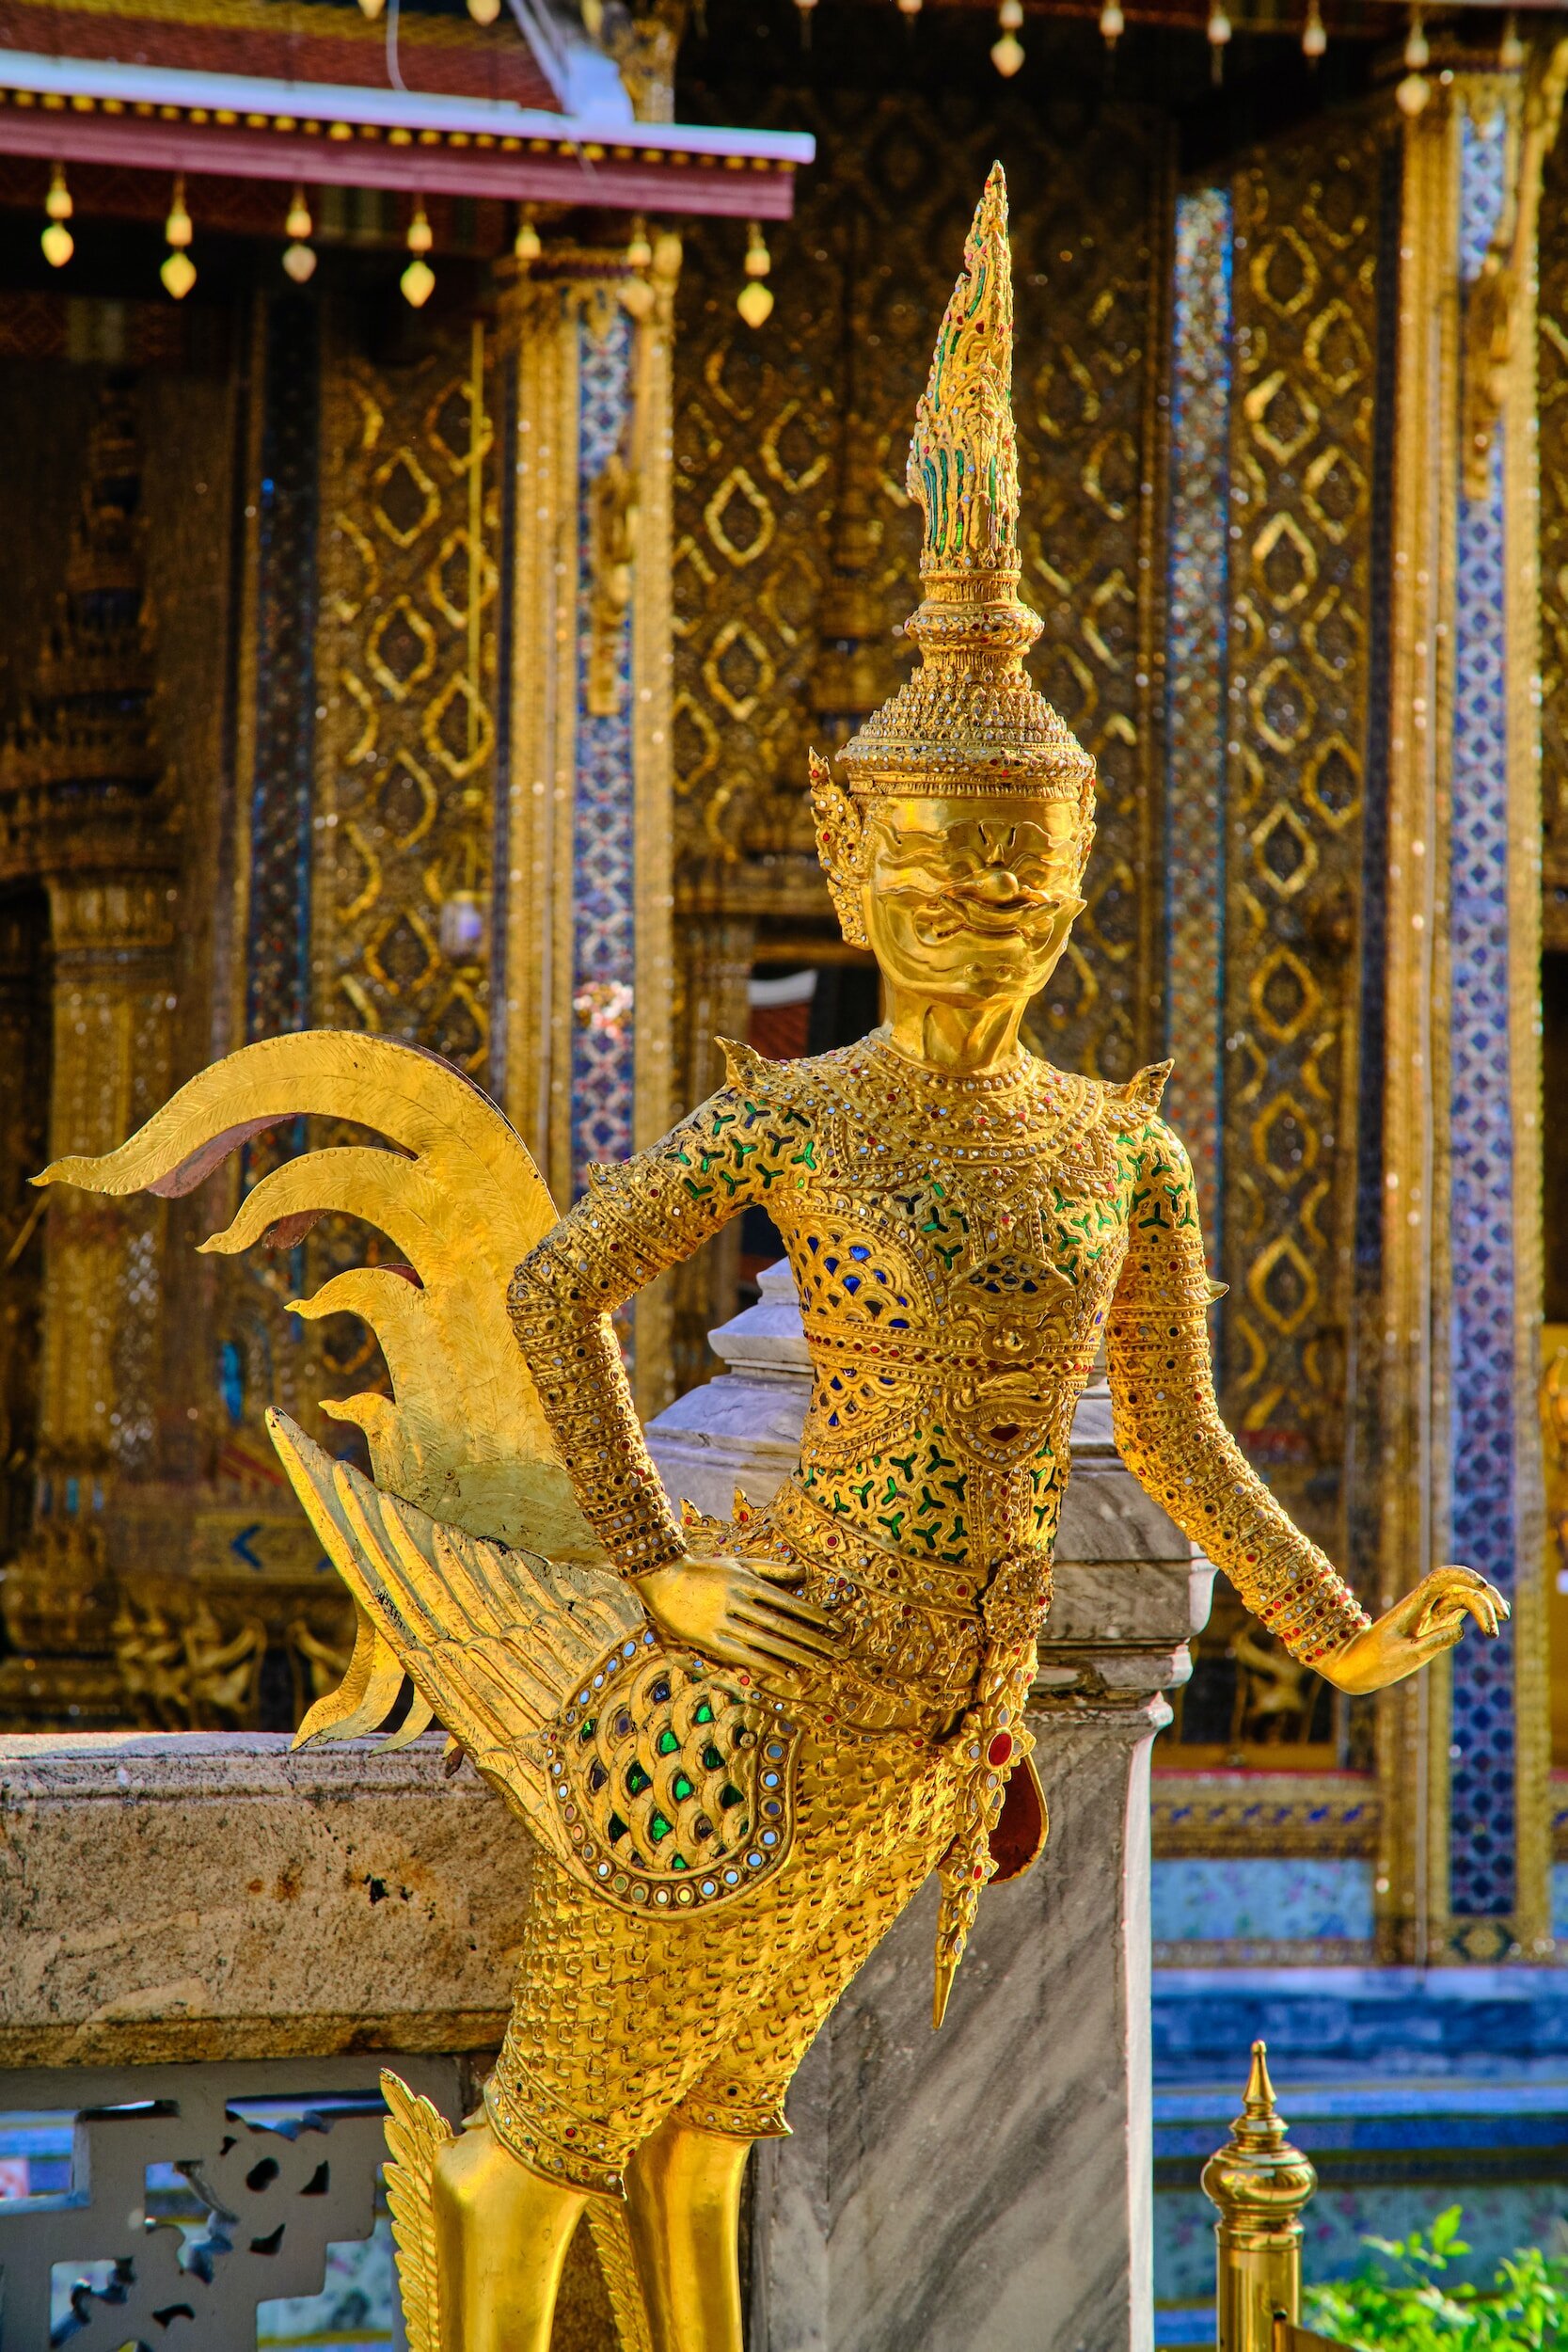 Thai temples are known for their intricate adornments, often in pure gold